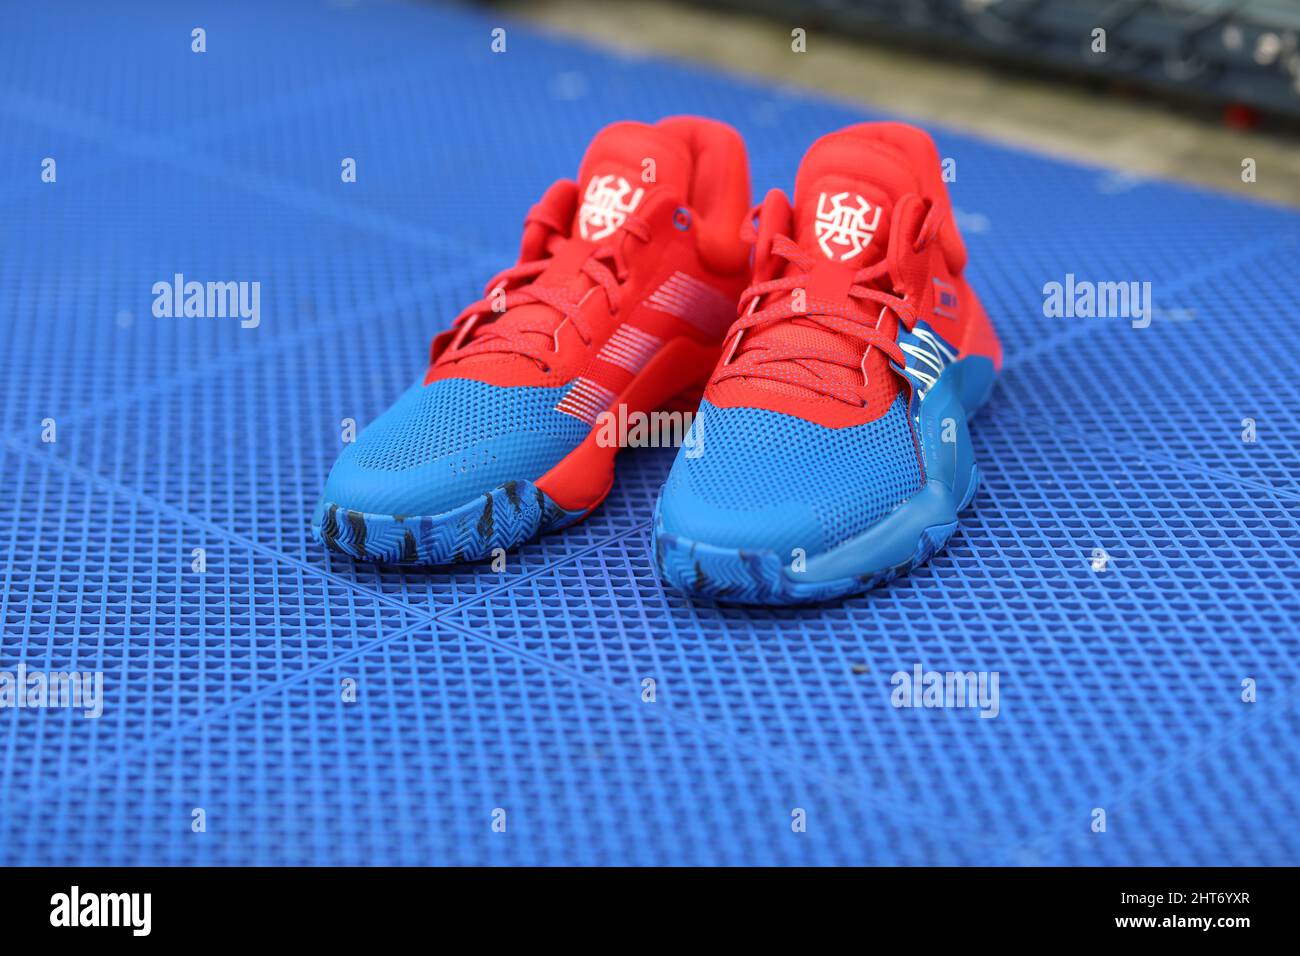 Sports shoes Sneakers Nike pose footwear Stock Photo - Alamy